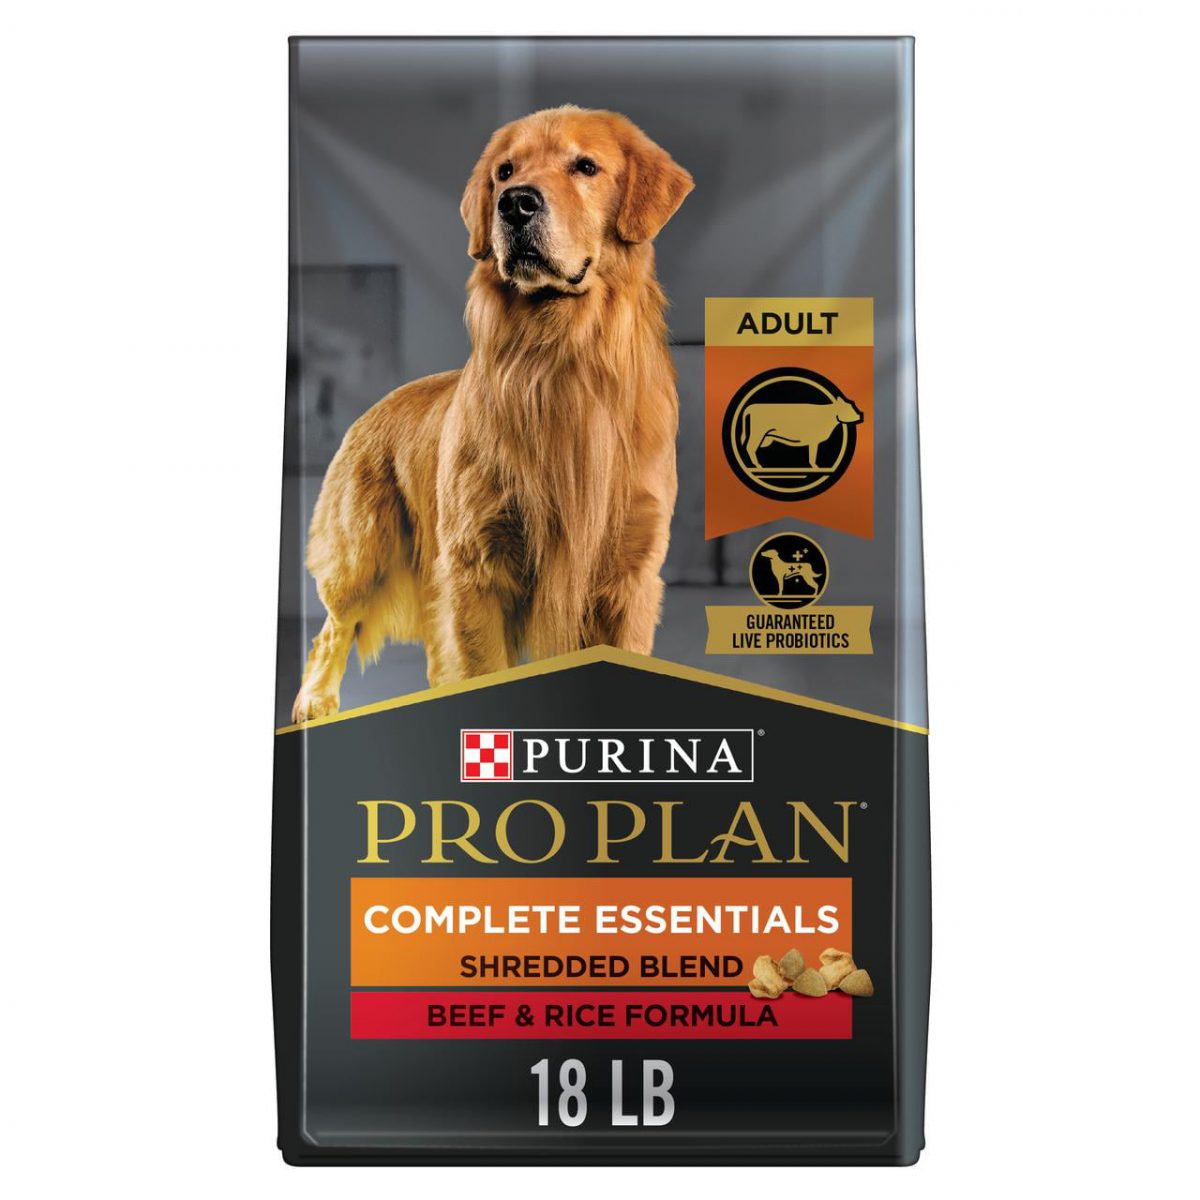 Purina Pro Plan High Protein Dog Food With Probiotics for Dogs ...